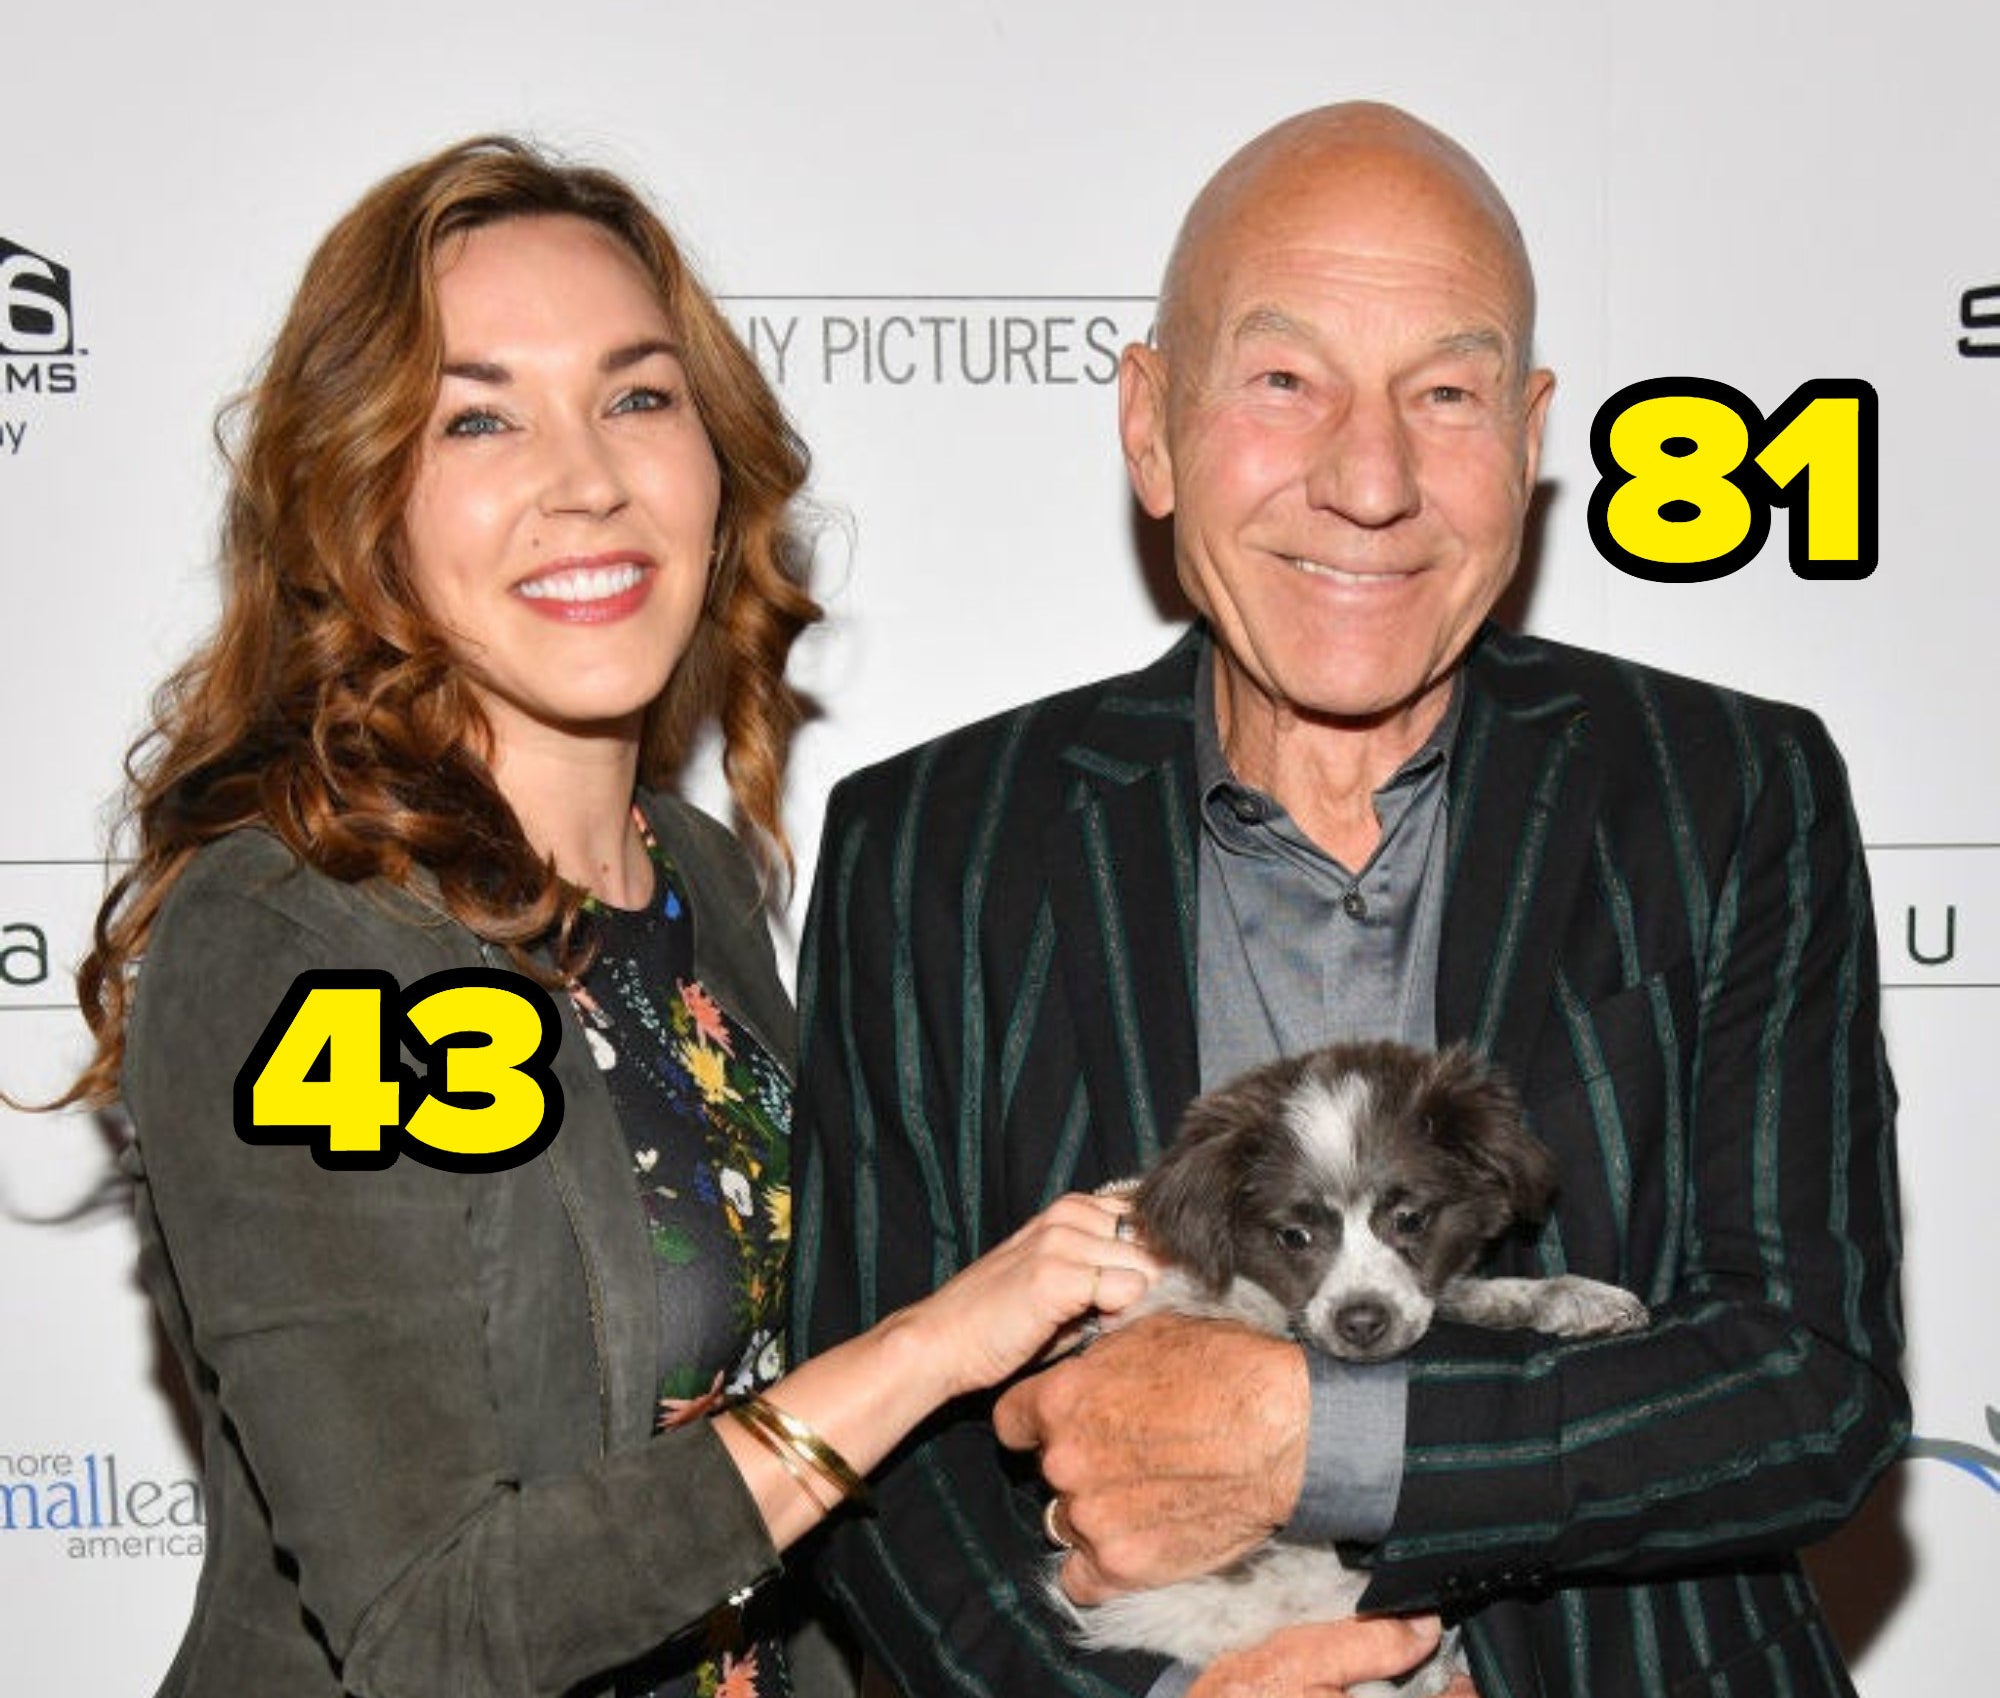 Sunny Ozell and Patrick Stewart holding a dog.